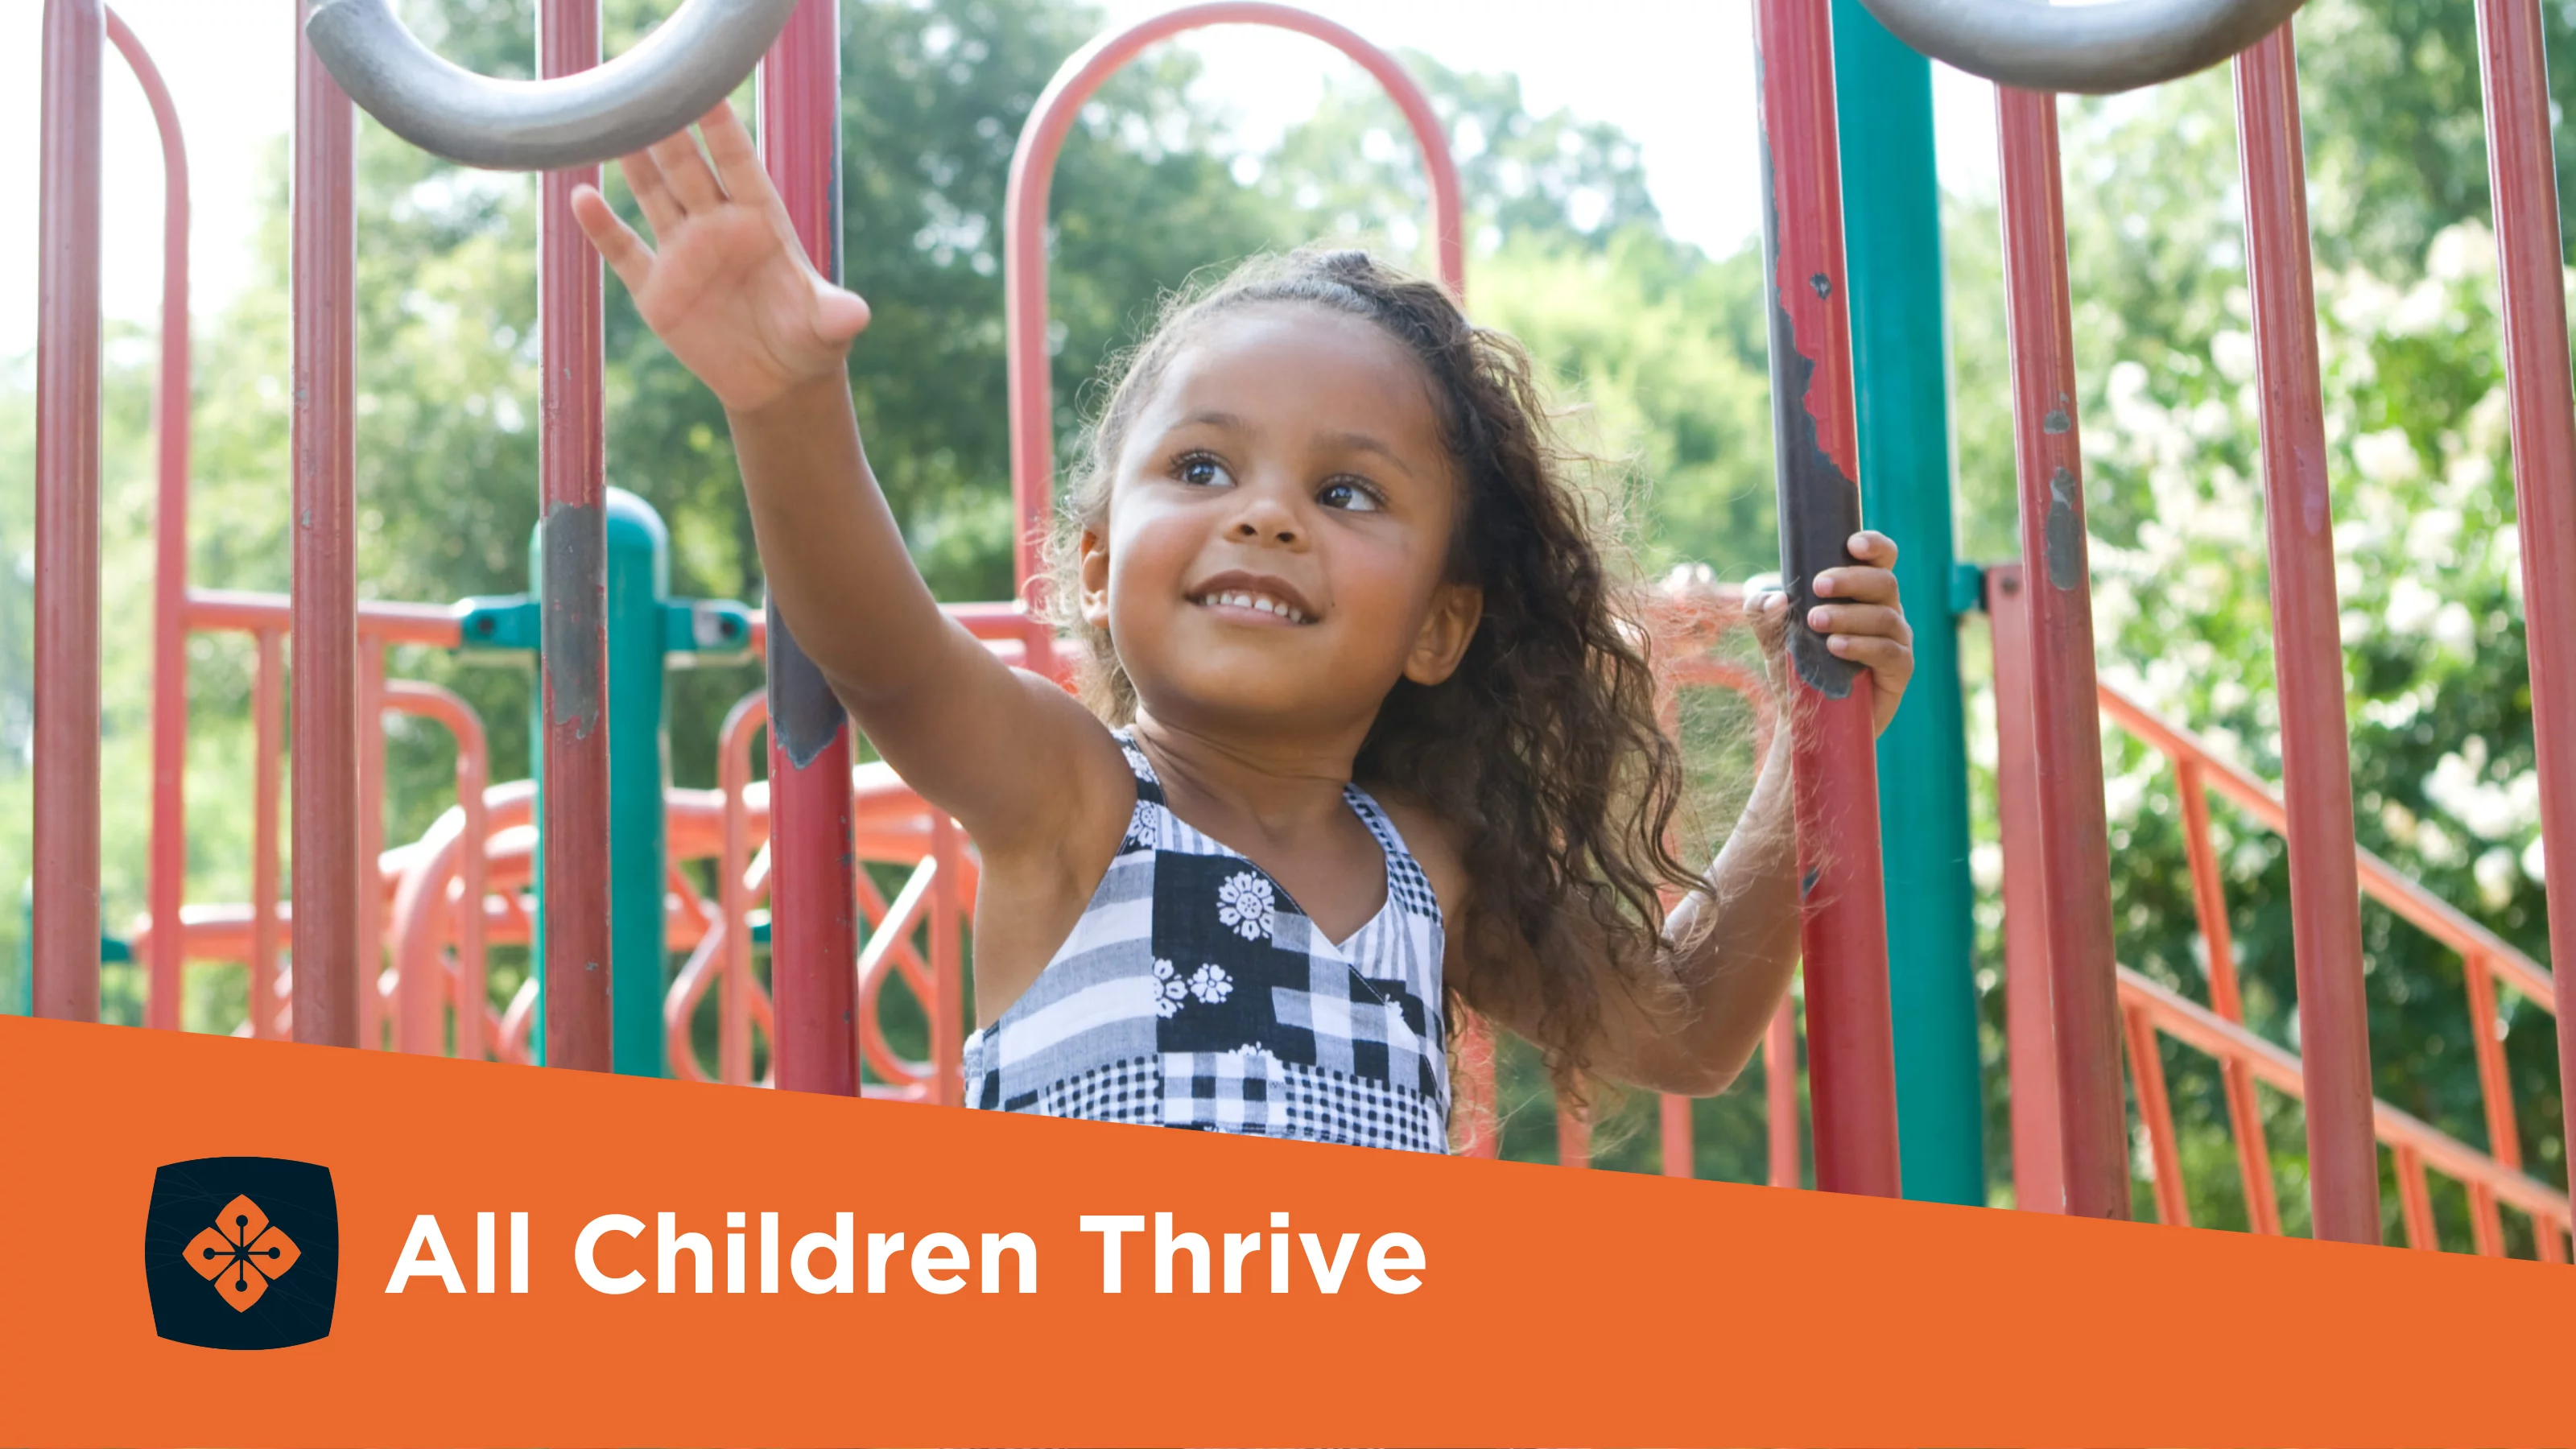 Photograph of young girl playing on a park playground with All Children Thrive logo on the bottom.